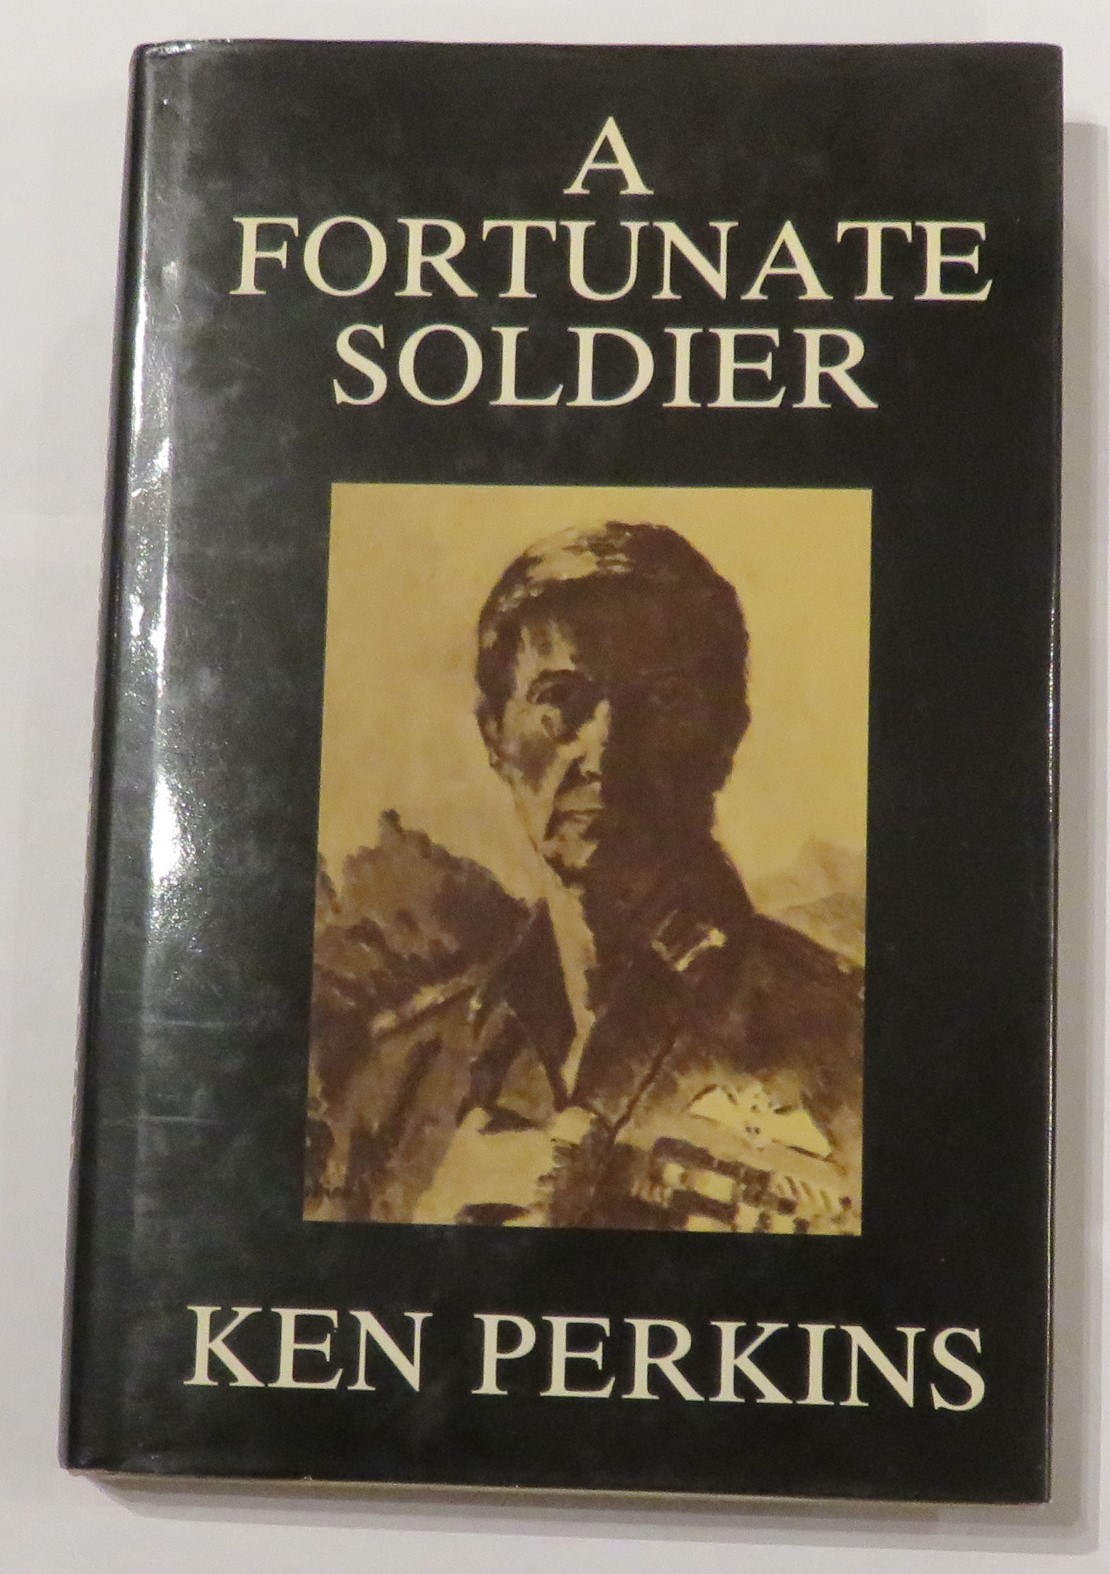 A Fortunate Soldier